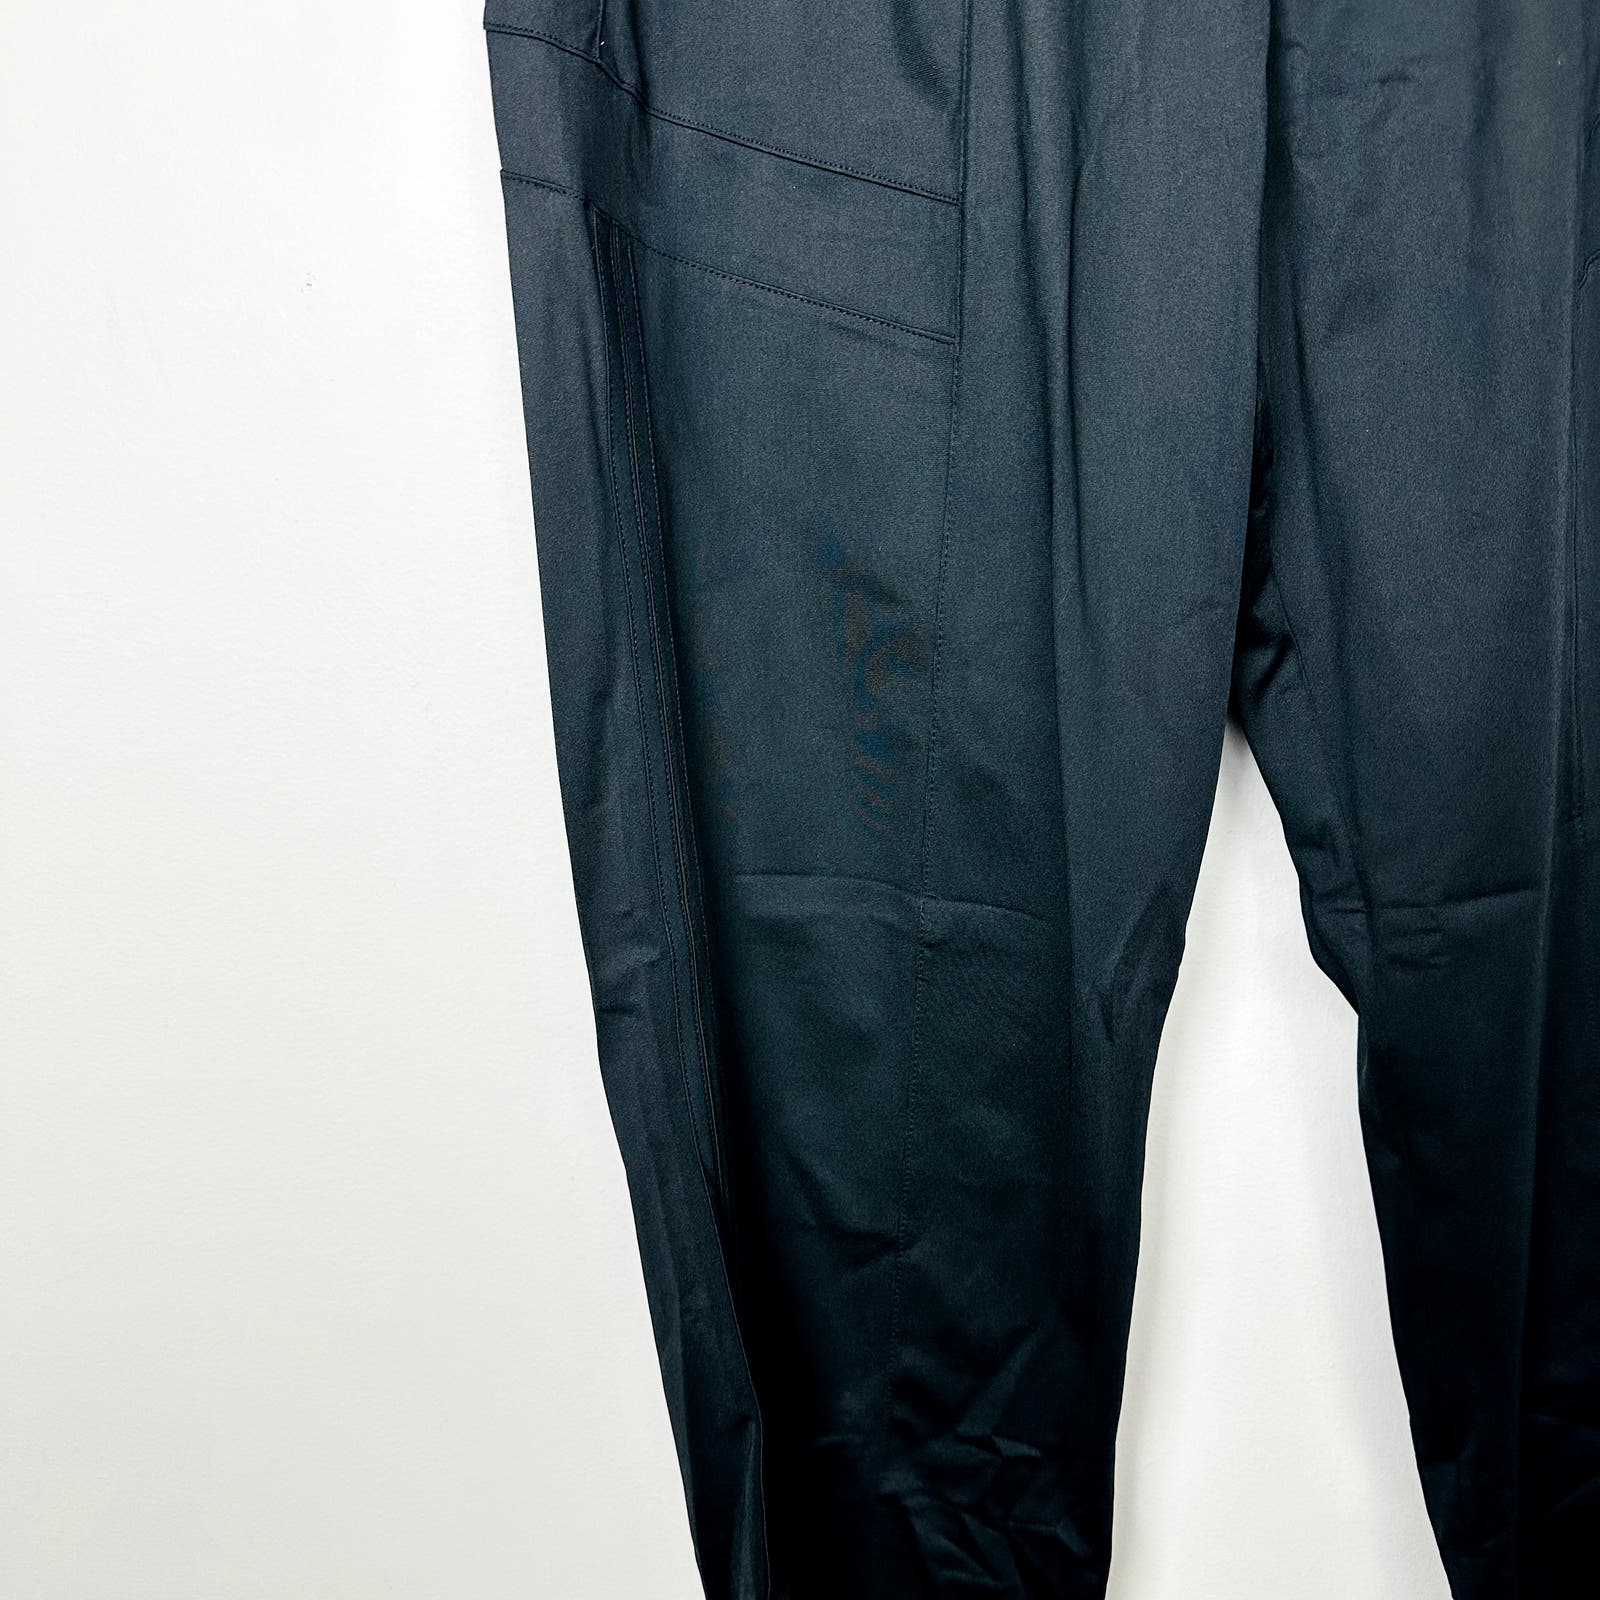 Outdoor Voices NWT Black Wide Leg Scrimmage Pant Size Medium